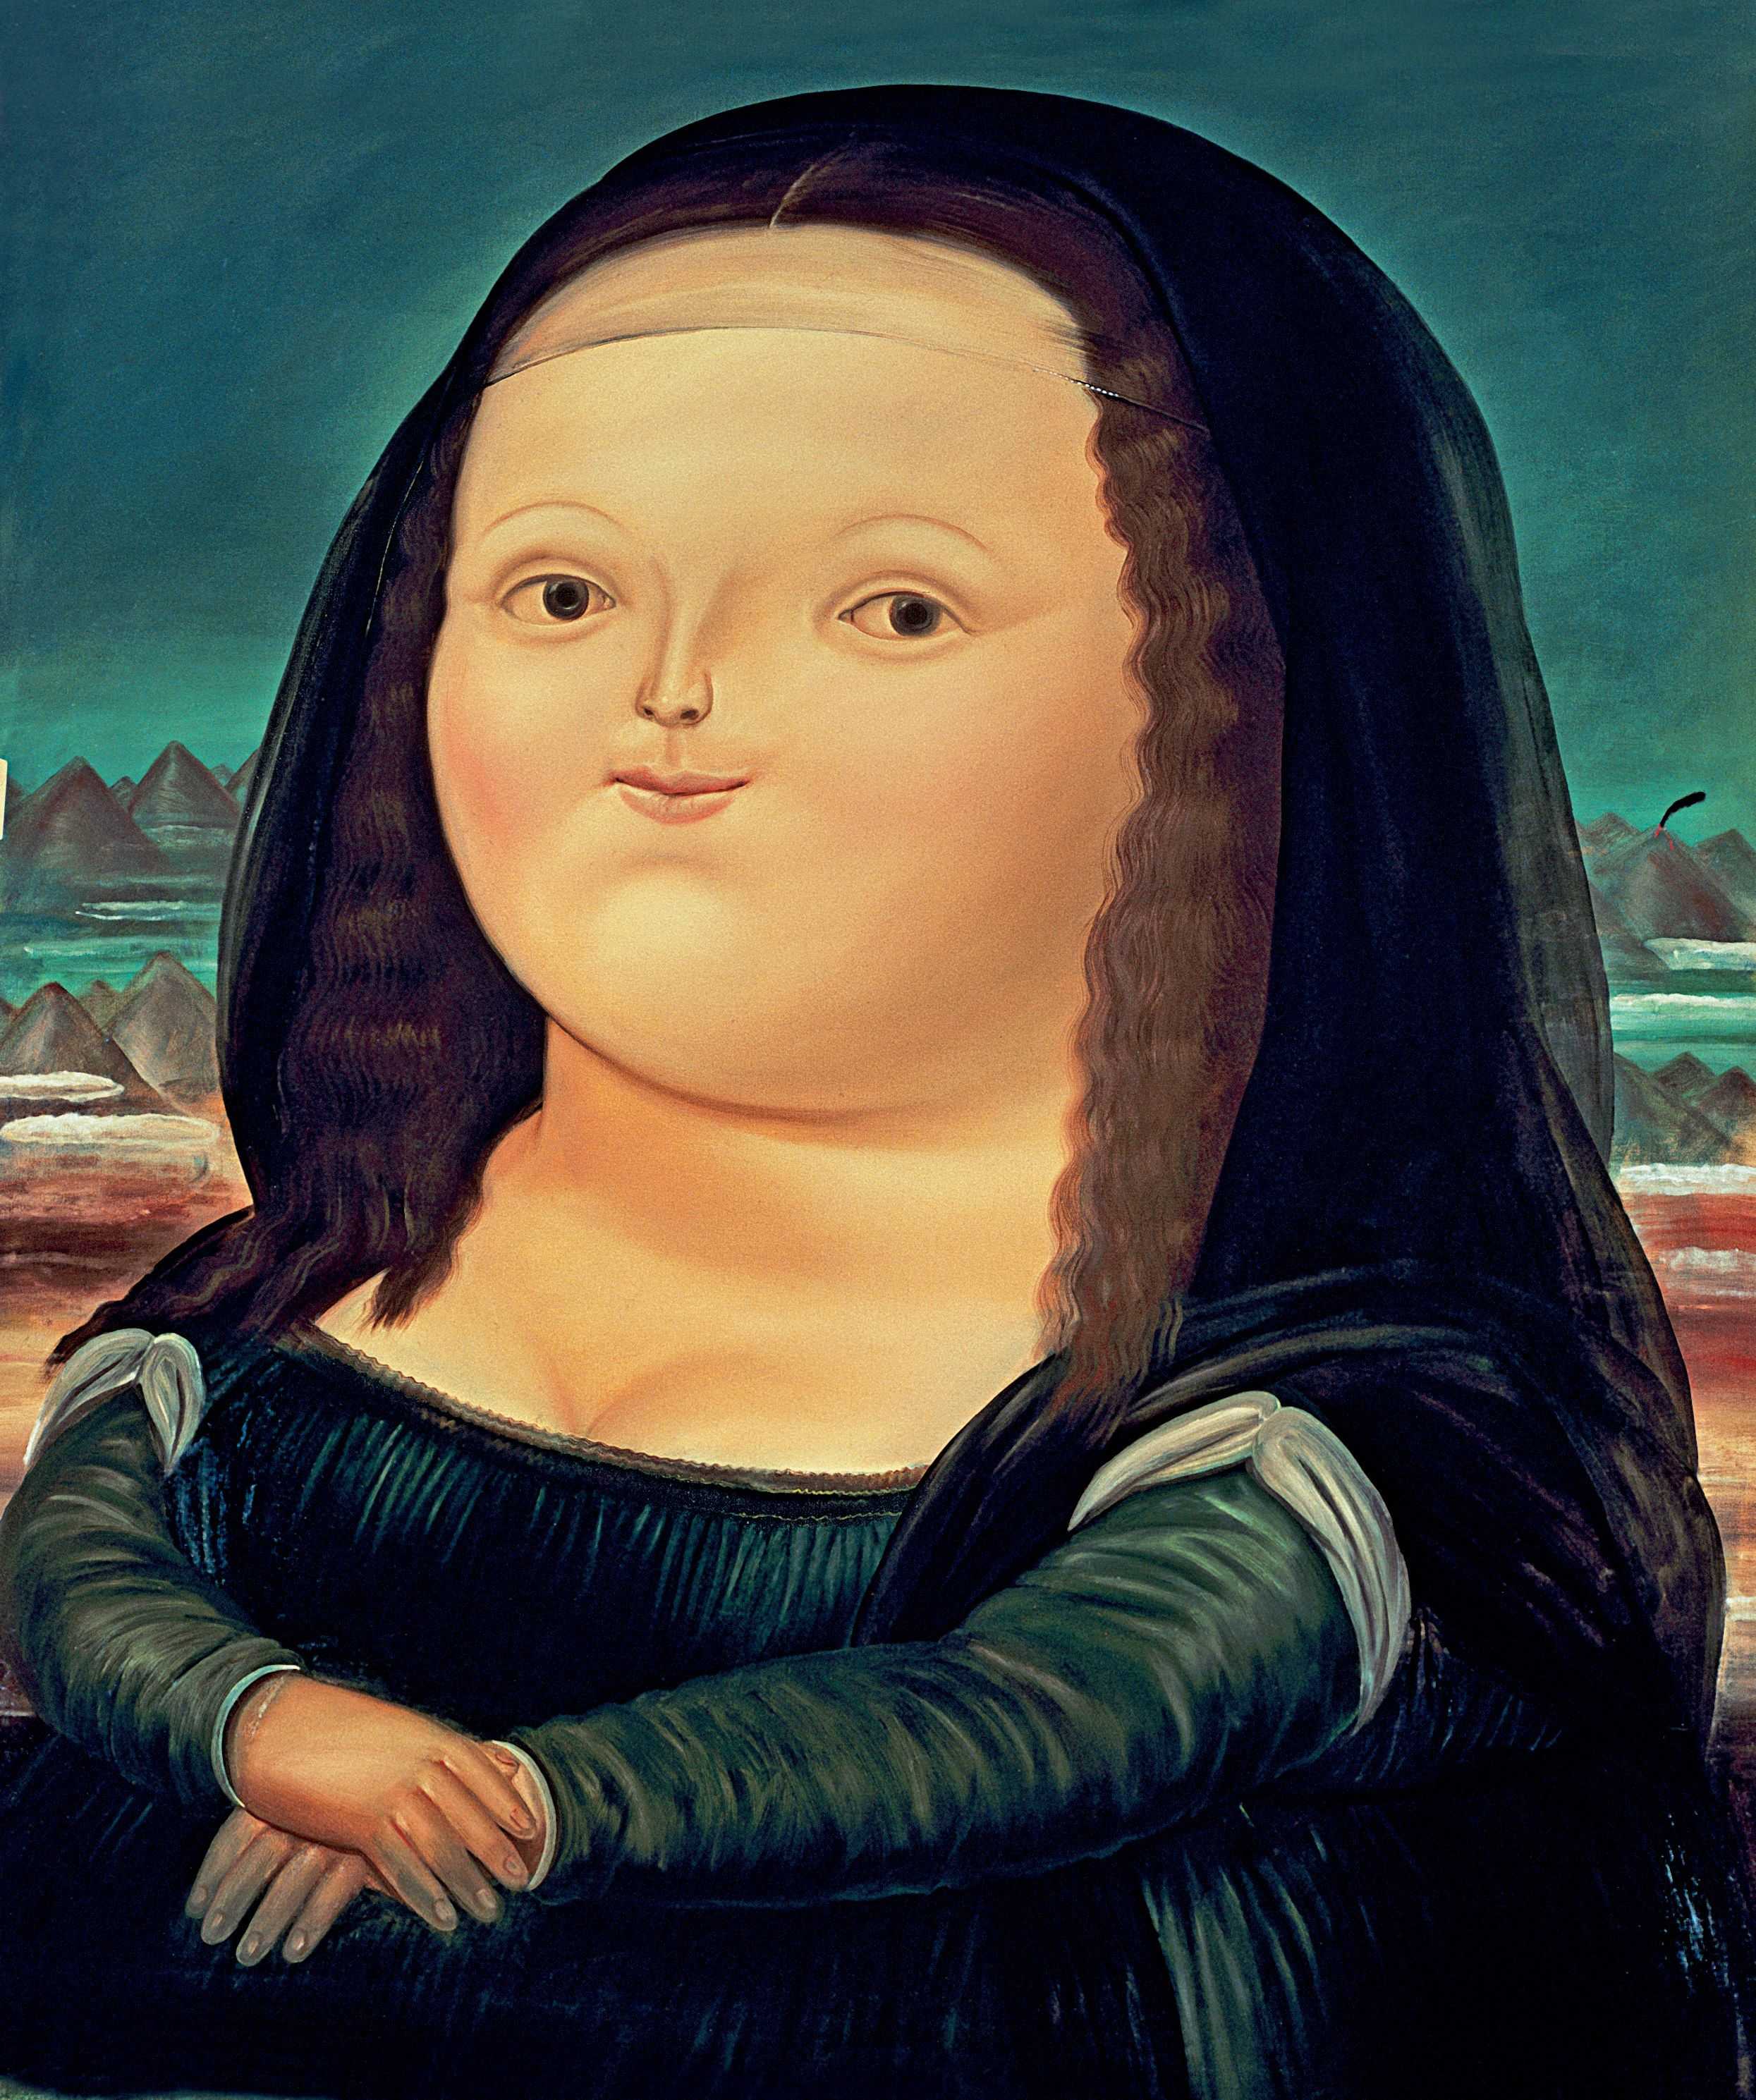 Find out more about Fernando Botero - Mona Lisa